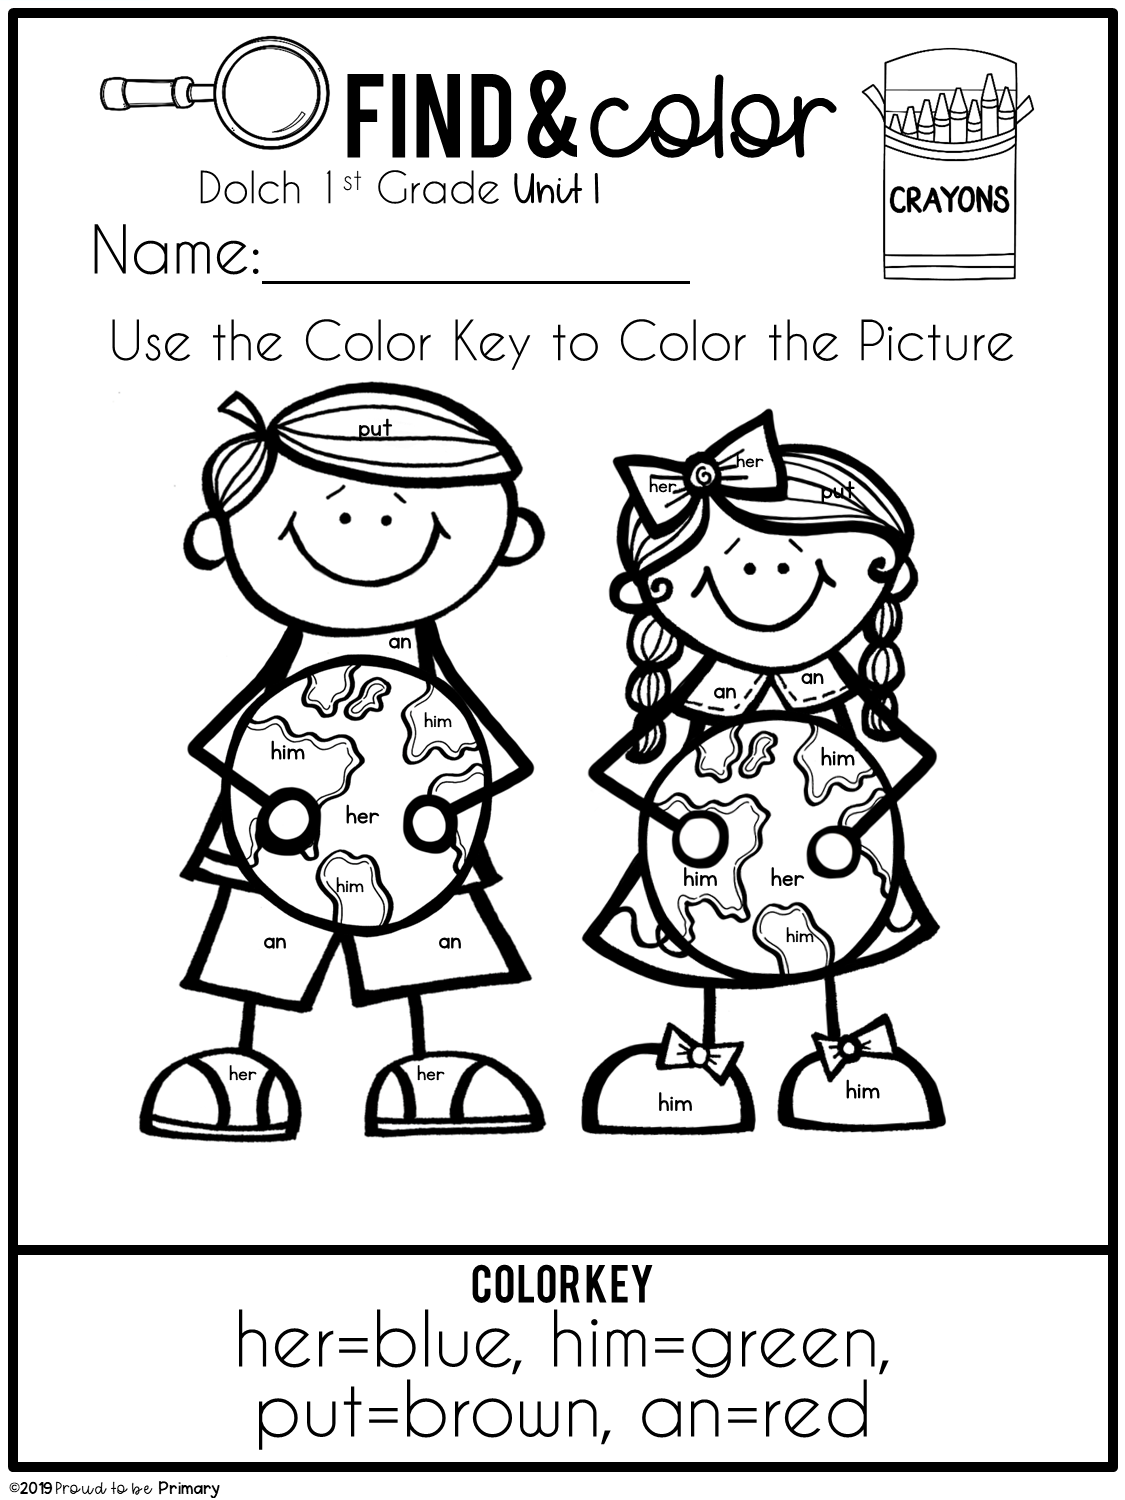 Dolch Sight Words - Find & Color - Proud to be Primary